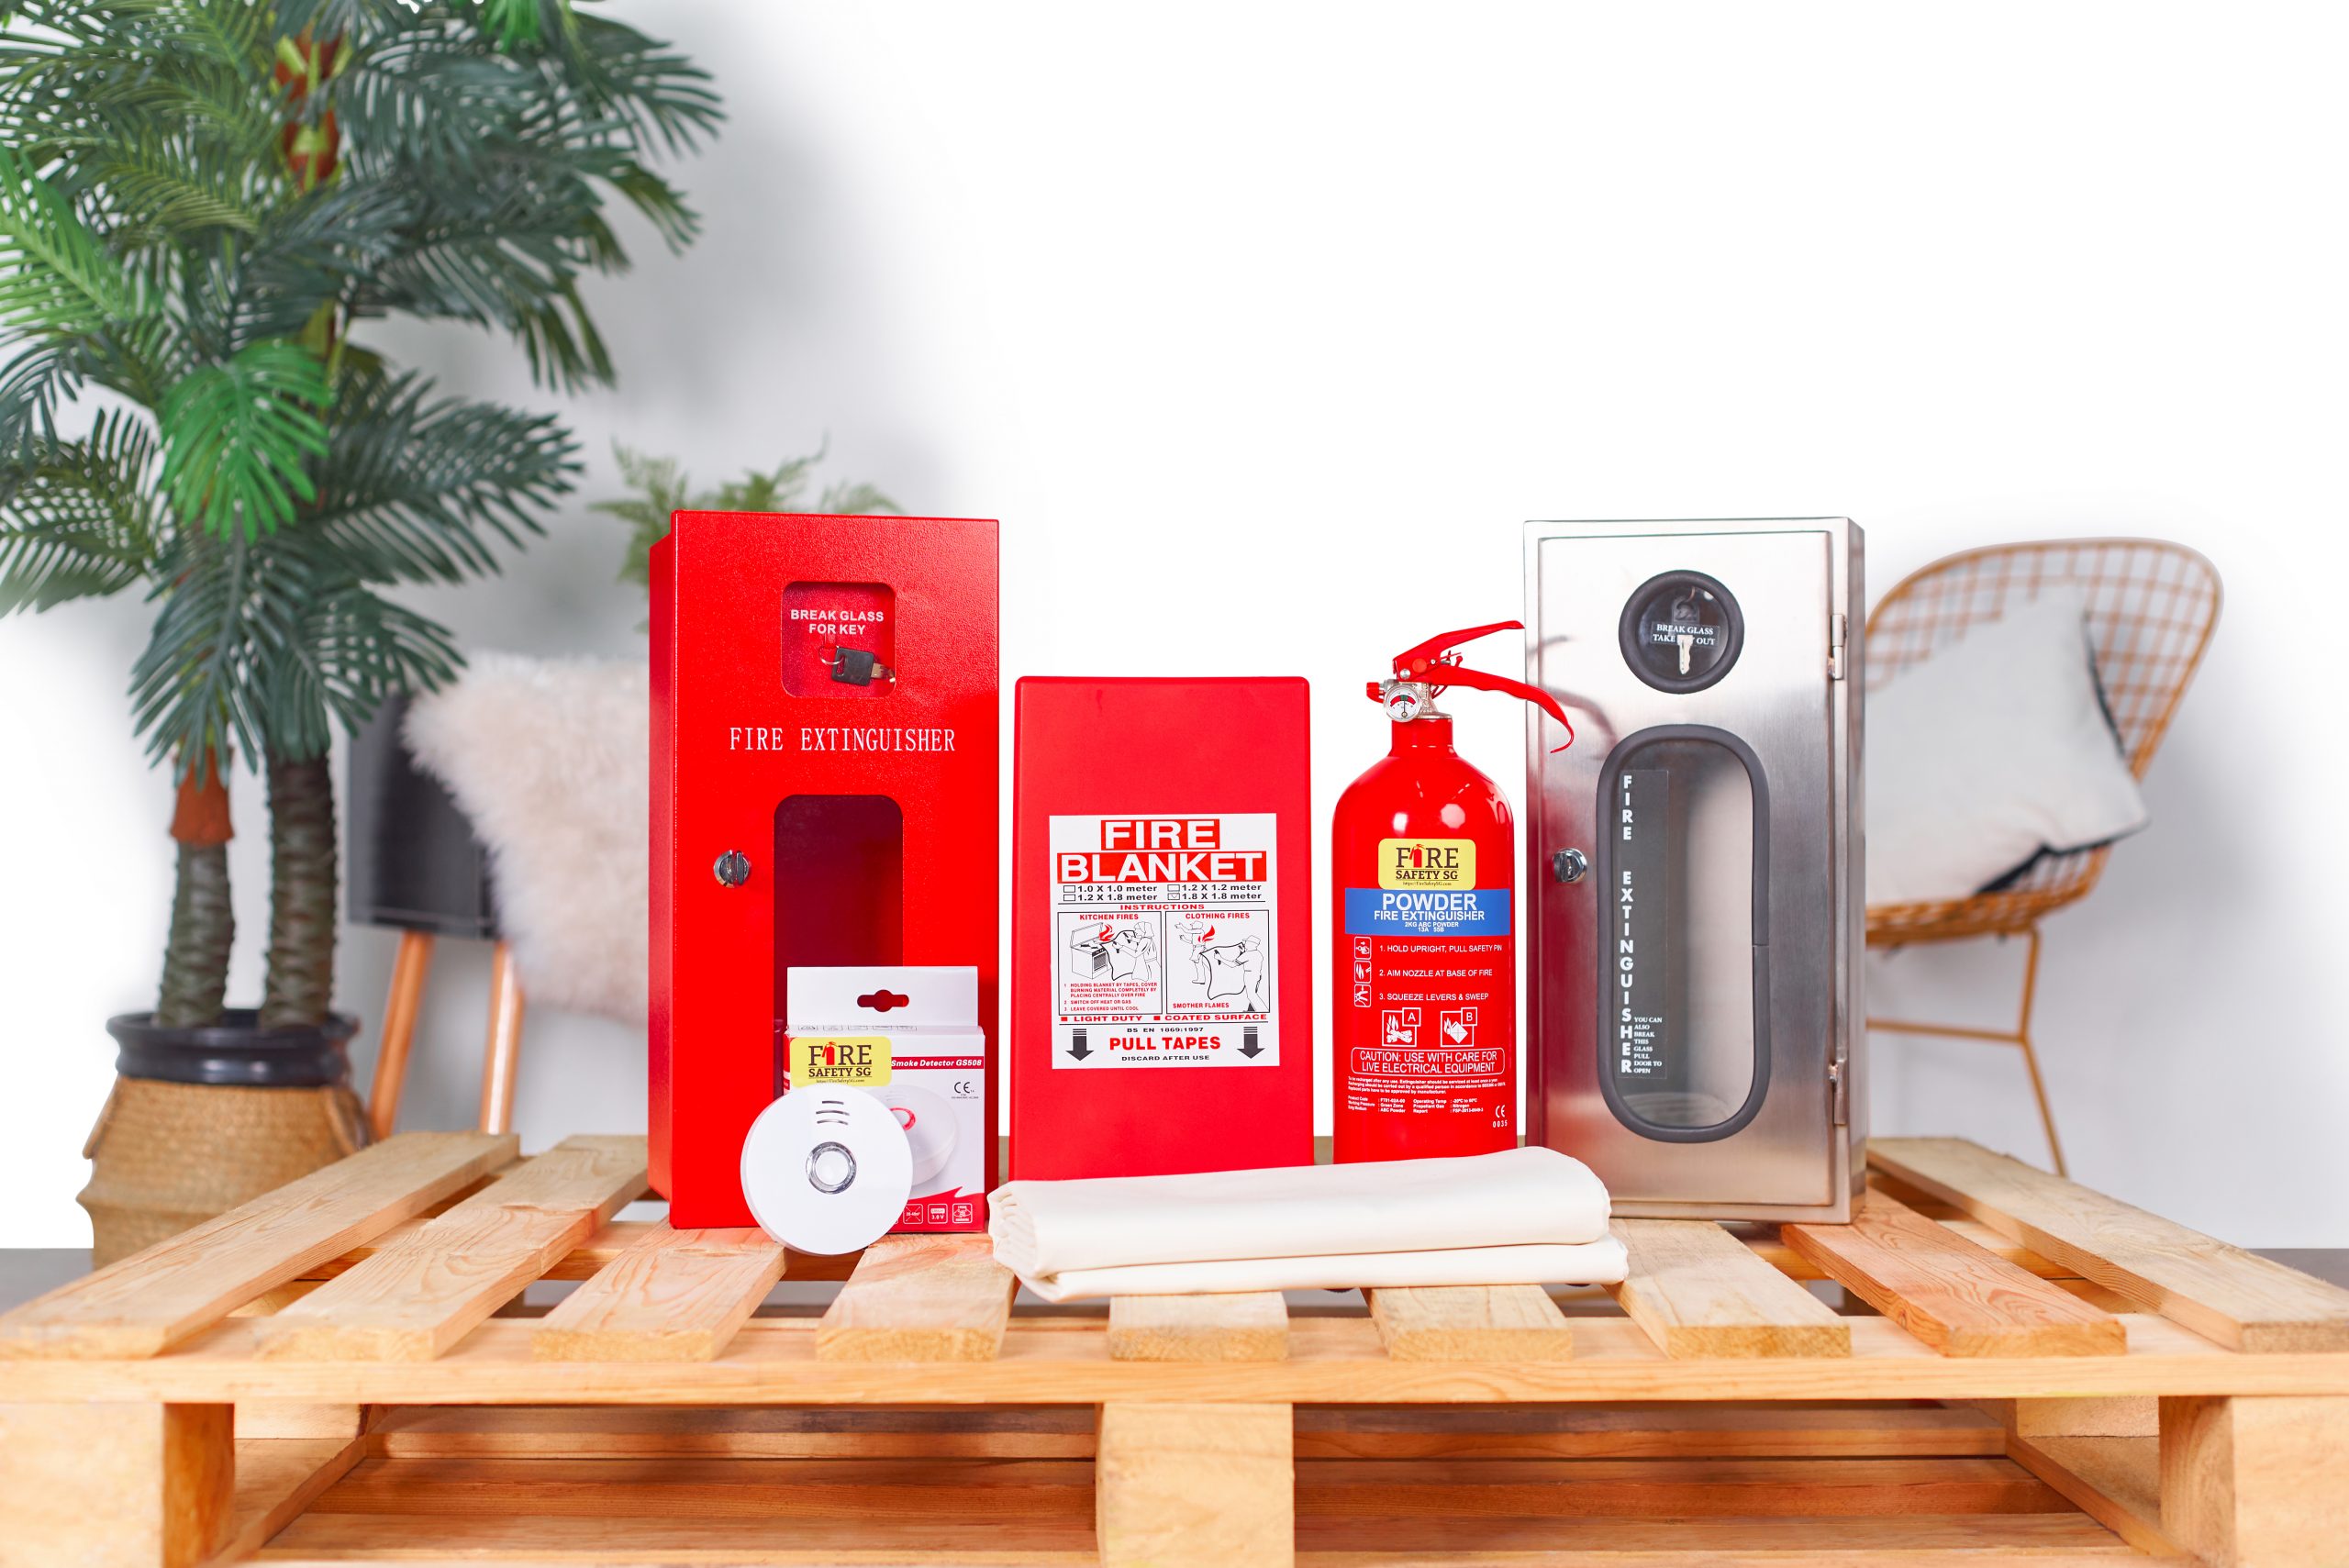 Fire extinguisher, fire extinguisher cabinet, fire alarm bell, and other fire safety equipment